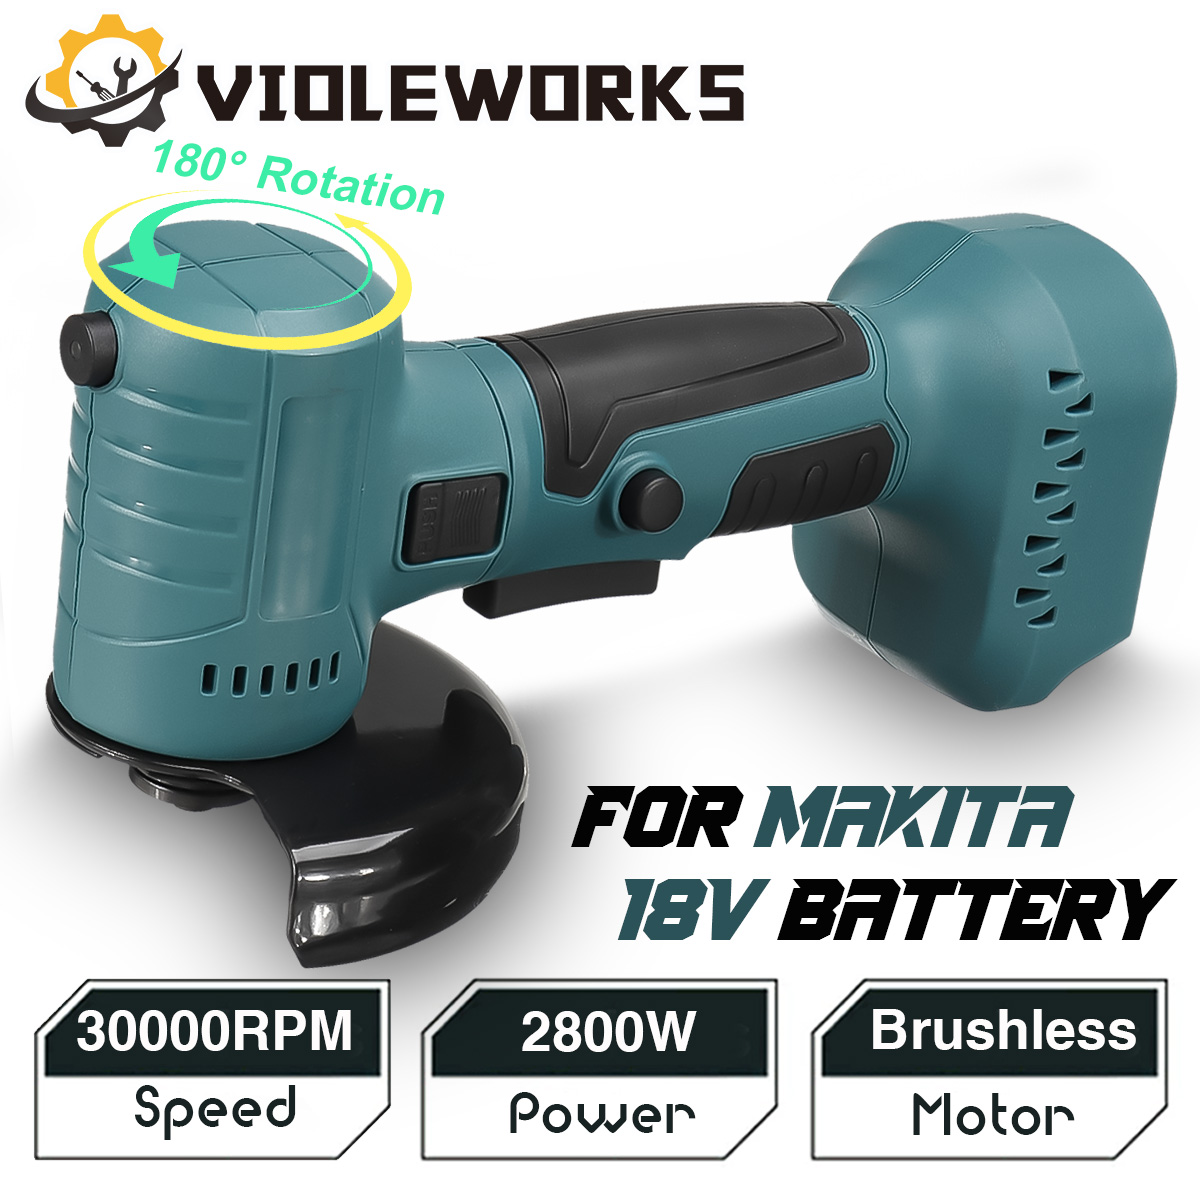 VIOLEWORKS-Mini-Brushless-Angle-Grinder-Cordless-Polishing-Grinding-Machine-Electric-Power-Tools-For-1930911-1